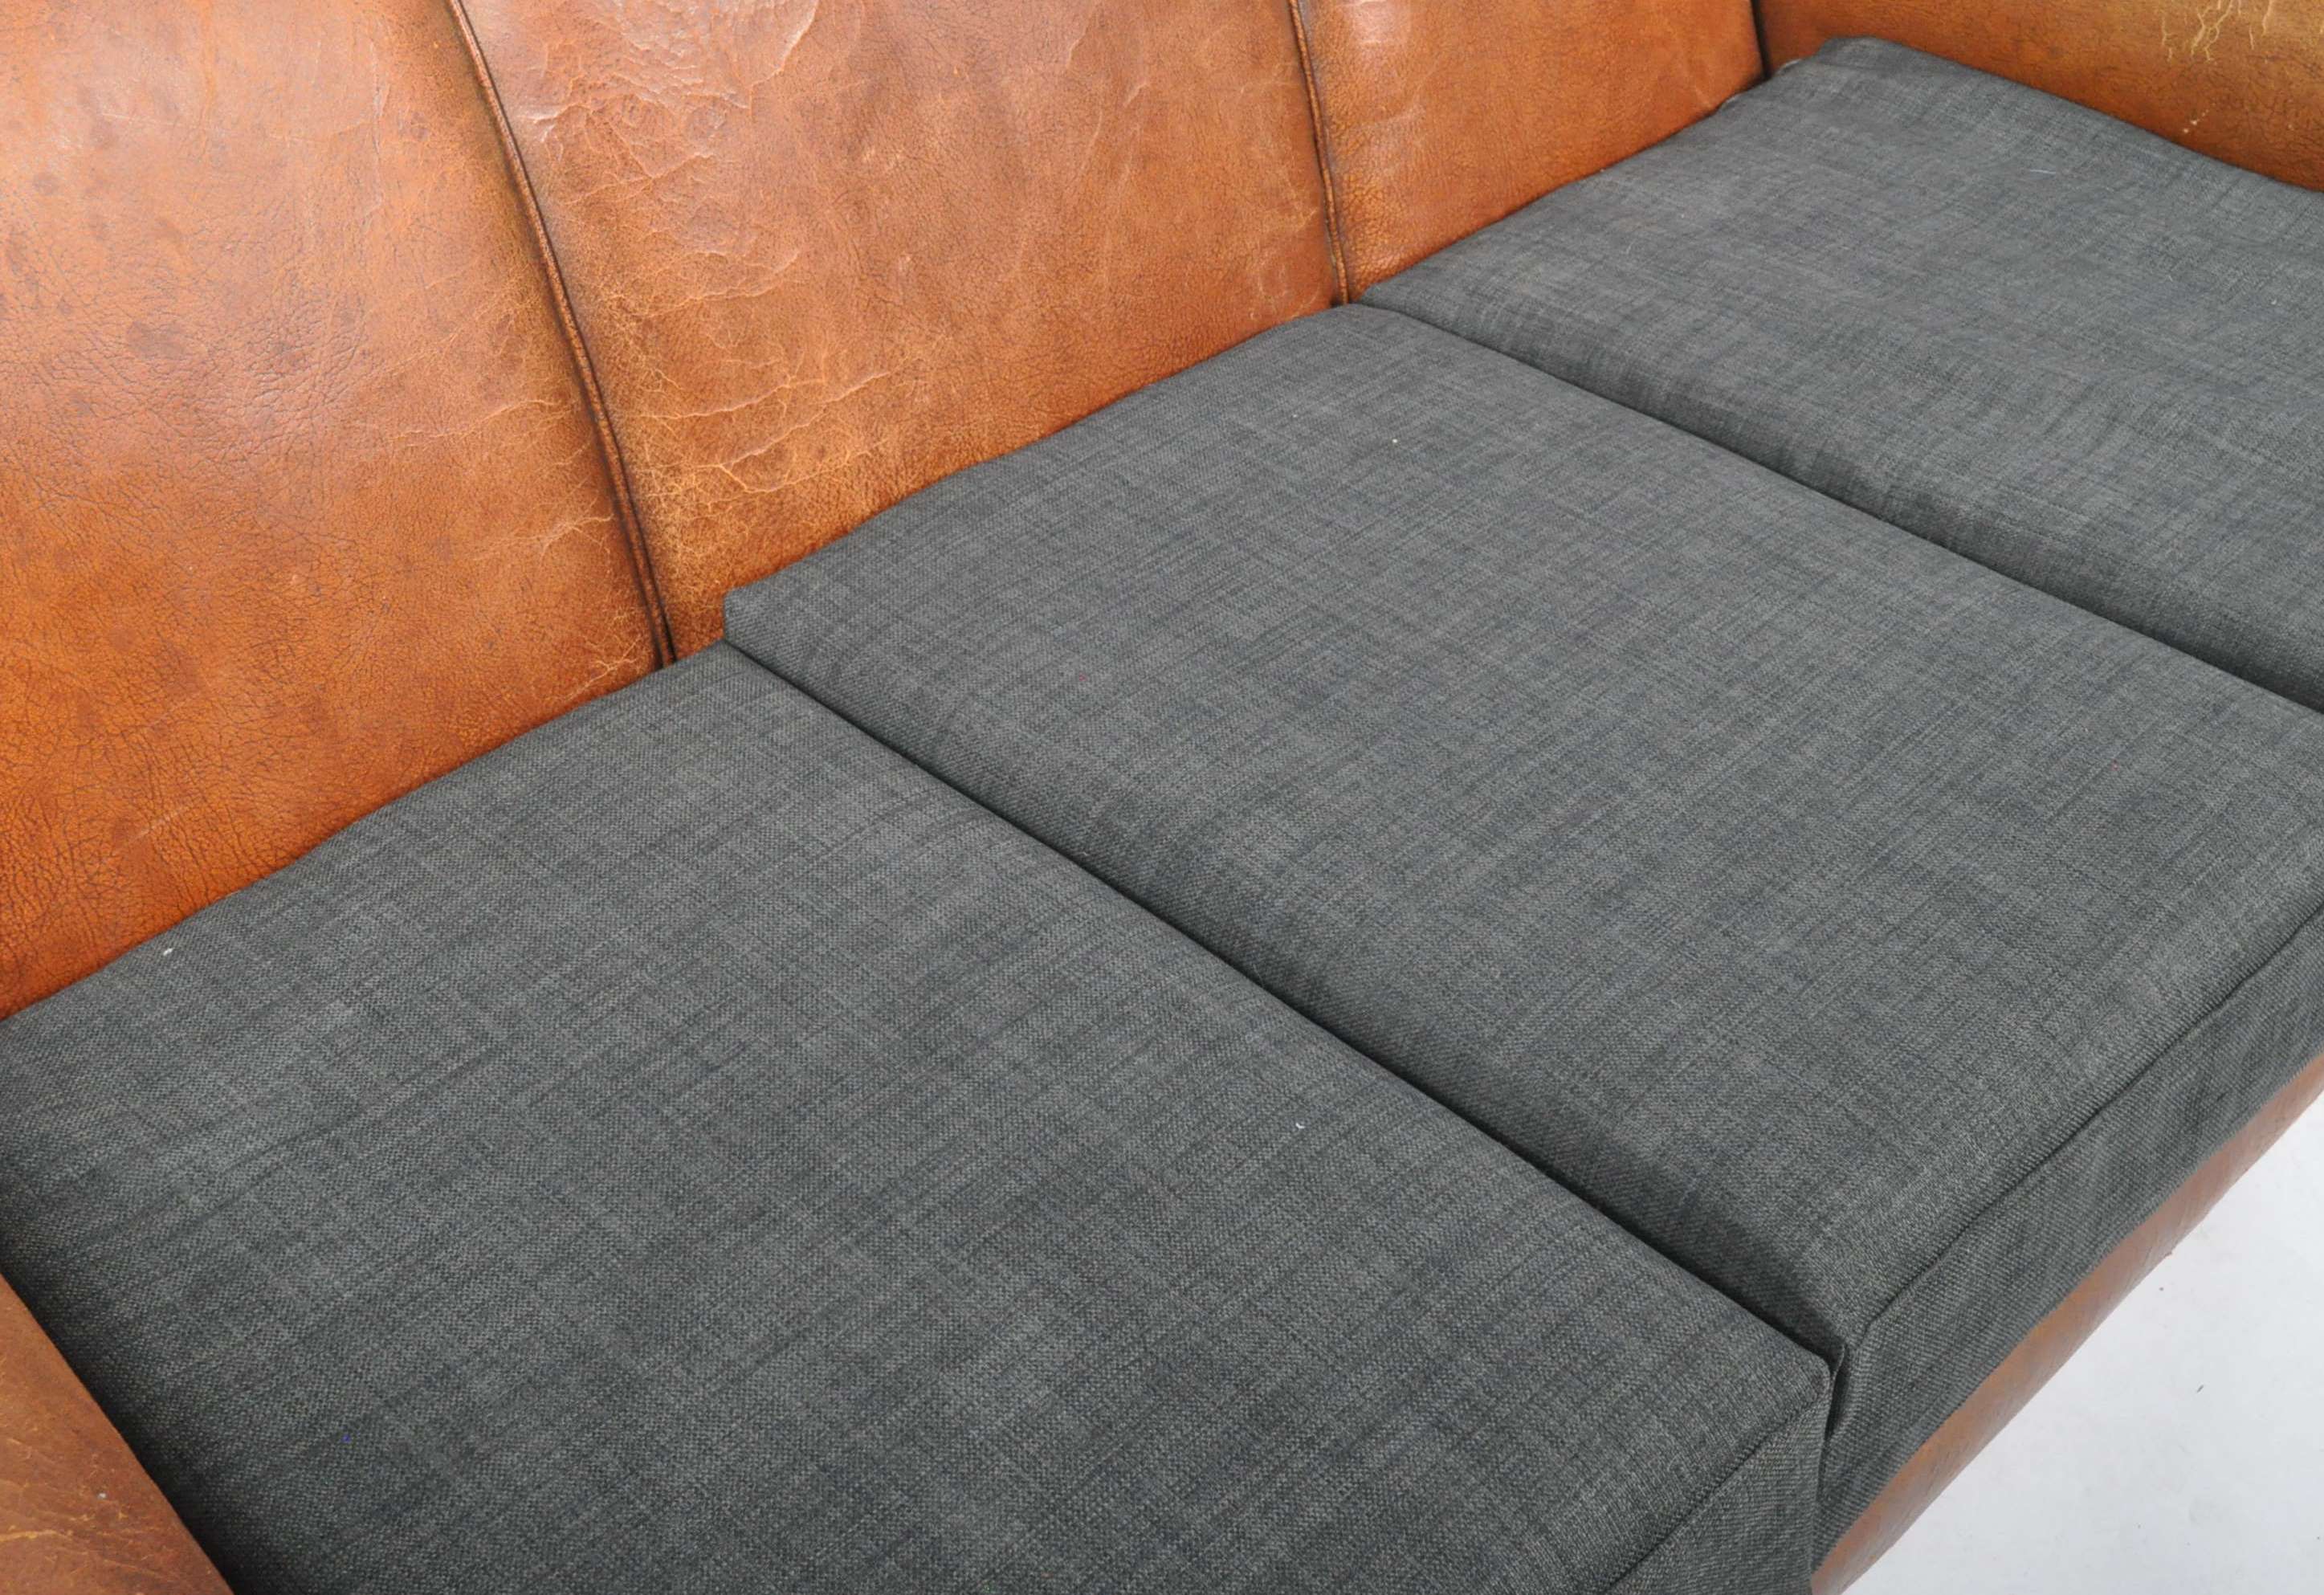 VINTAGE ART DECO CHESTERFIELD THREE SEATER SOFA SETTEE - Image 3 of 6